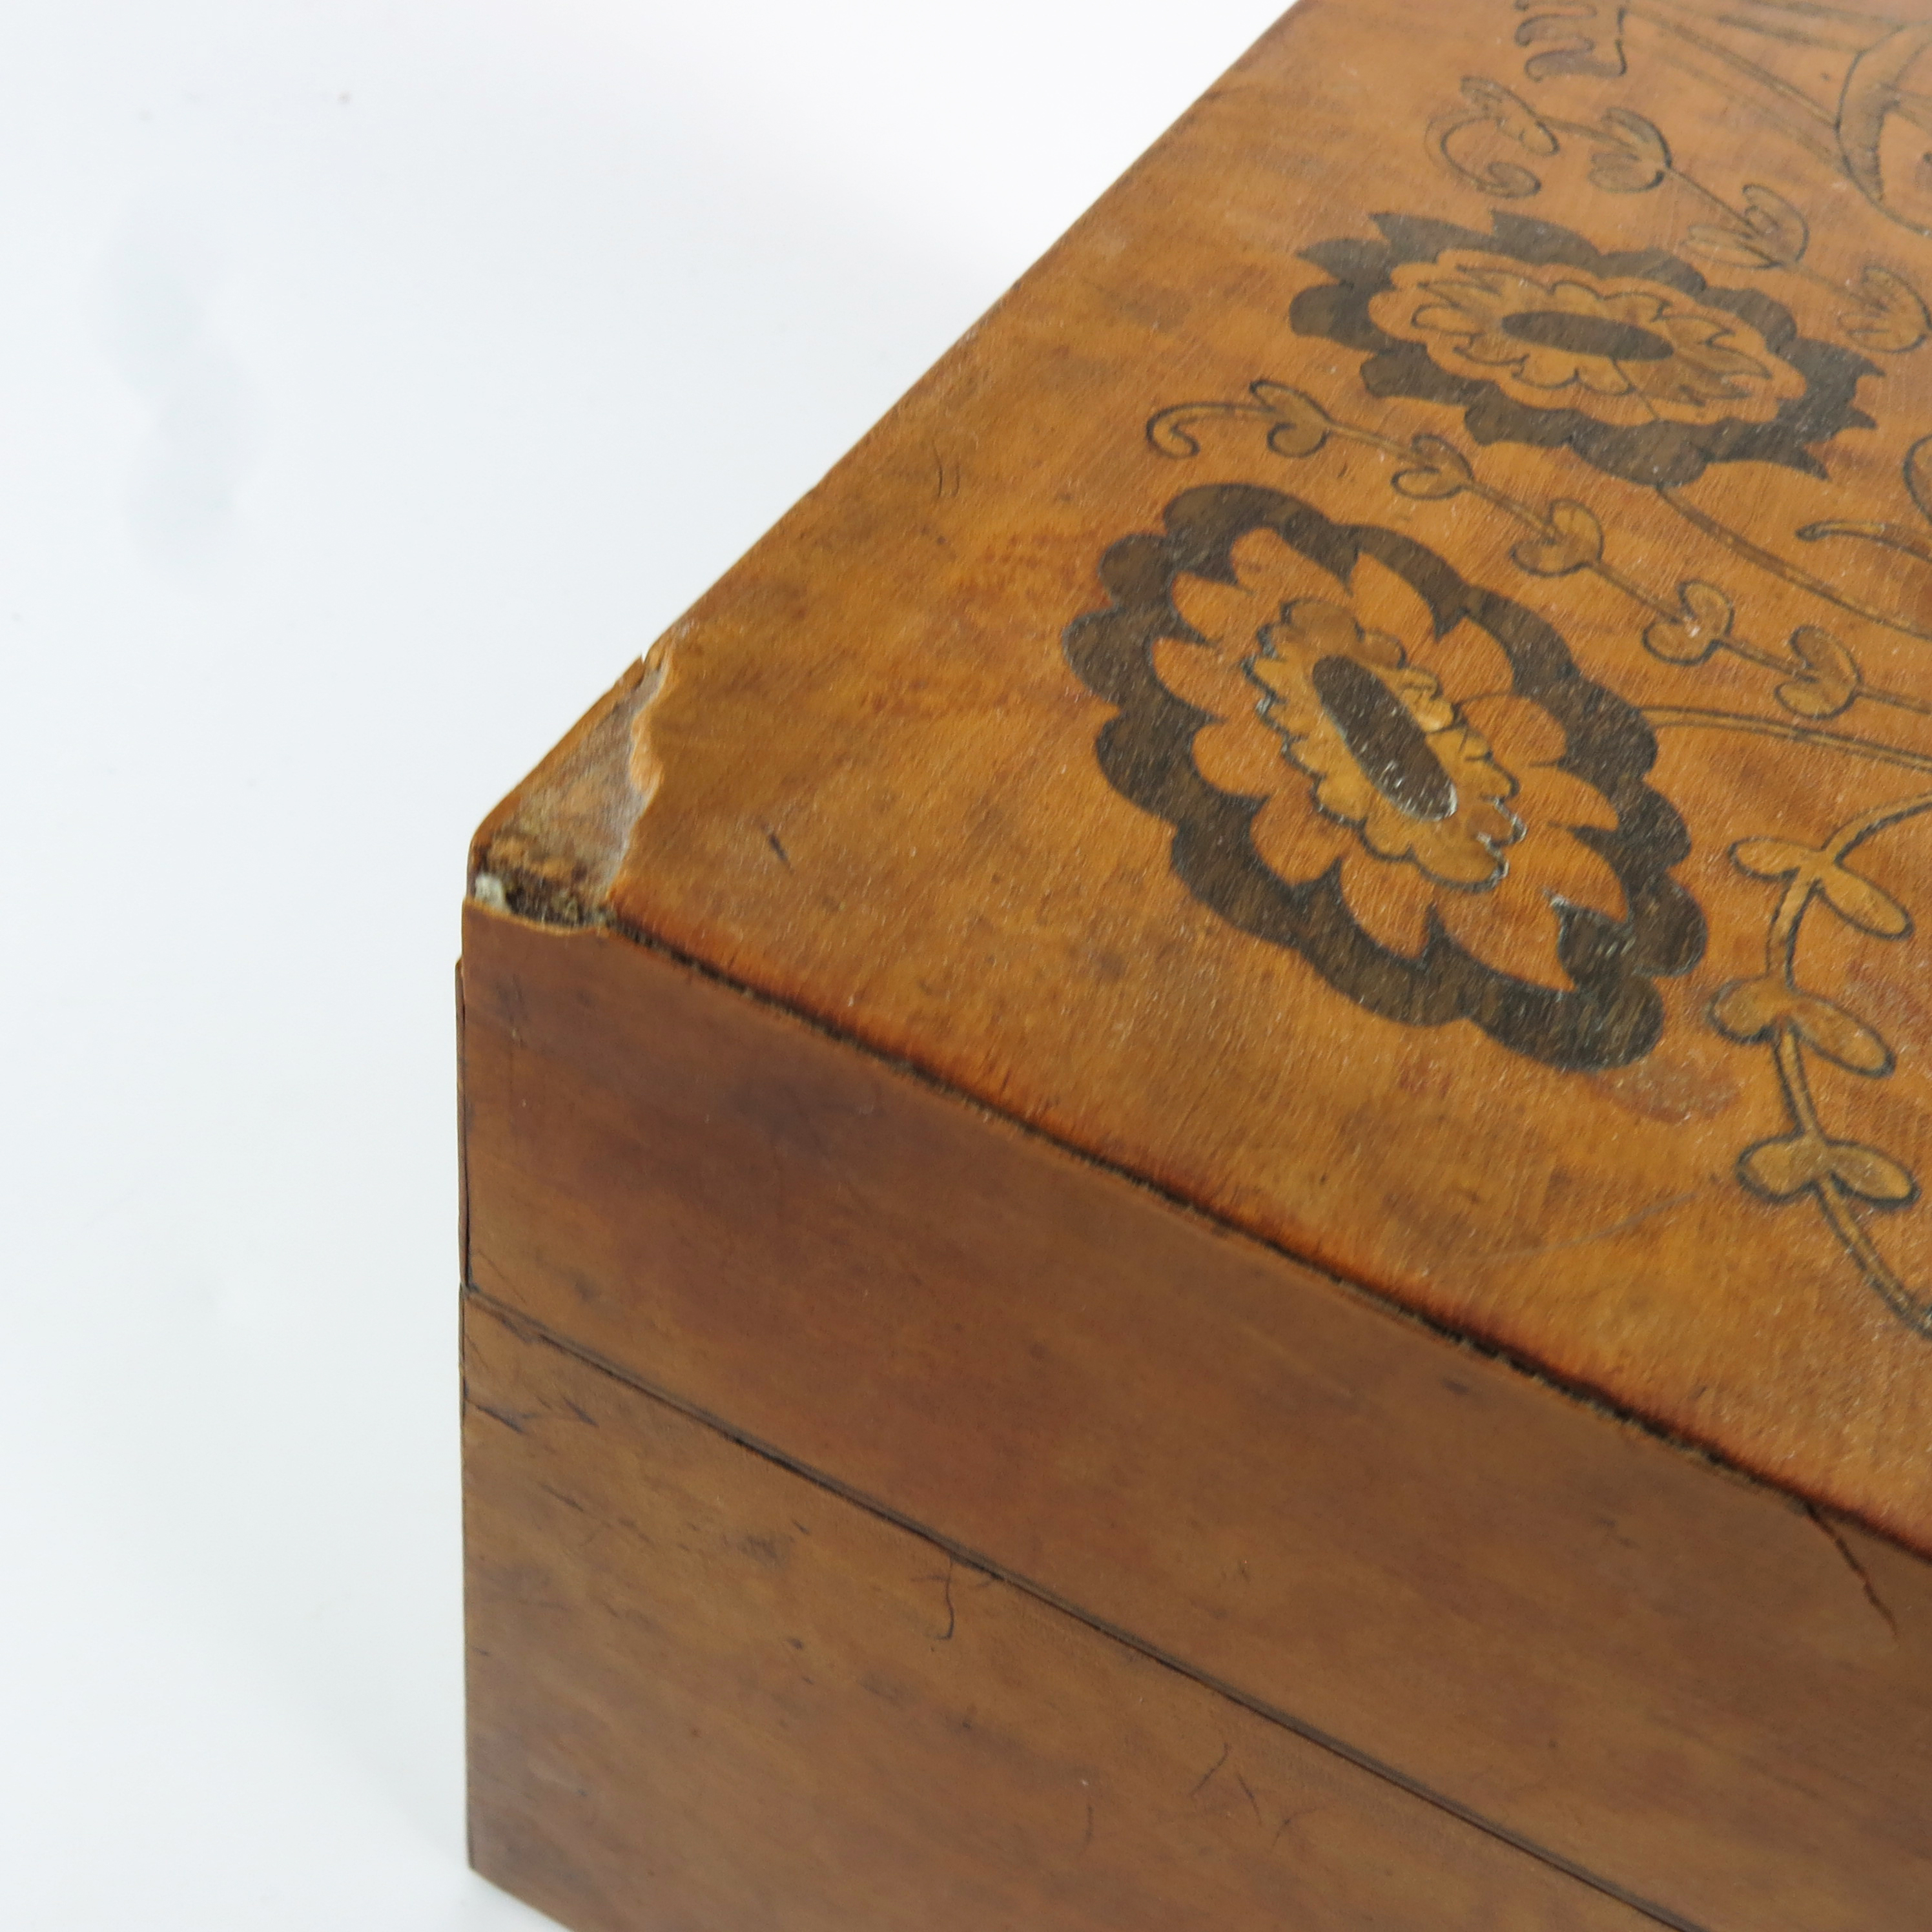 TEA CADDY WITH FLORAL POKER WORK DECORATION AND FITTED INTERIOR - Image 7 of 8